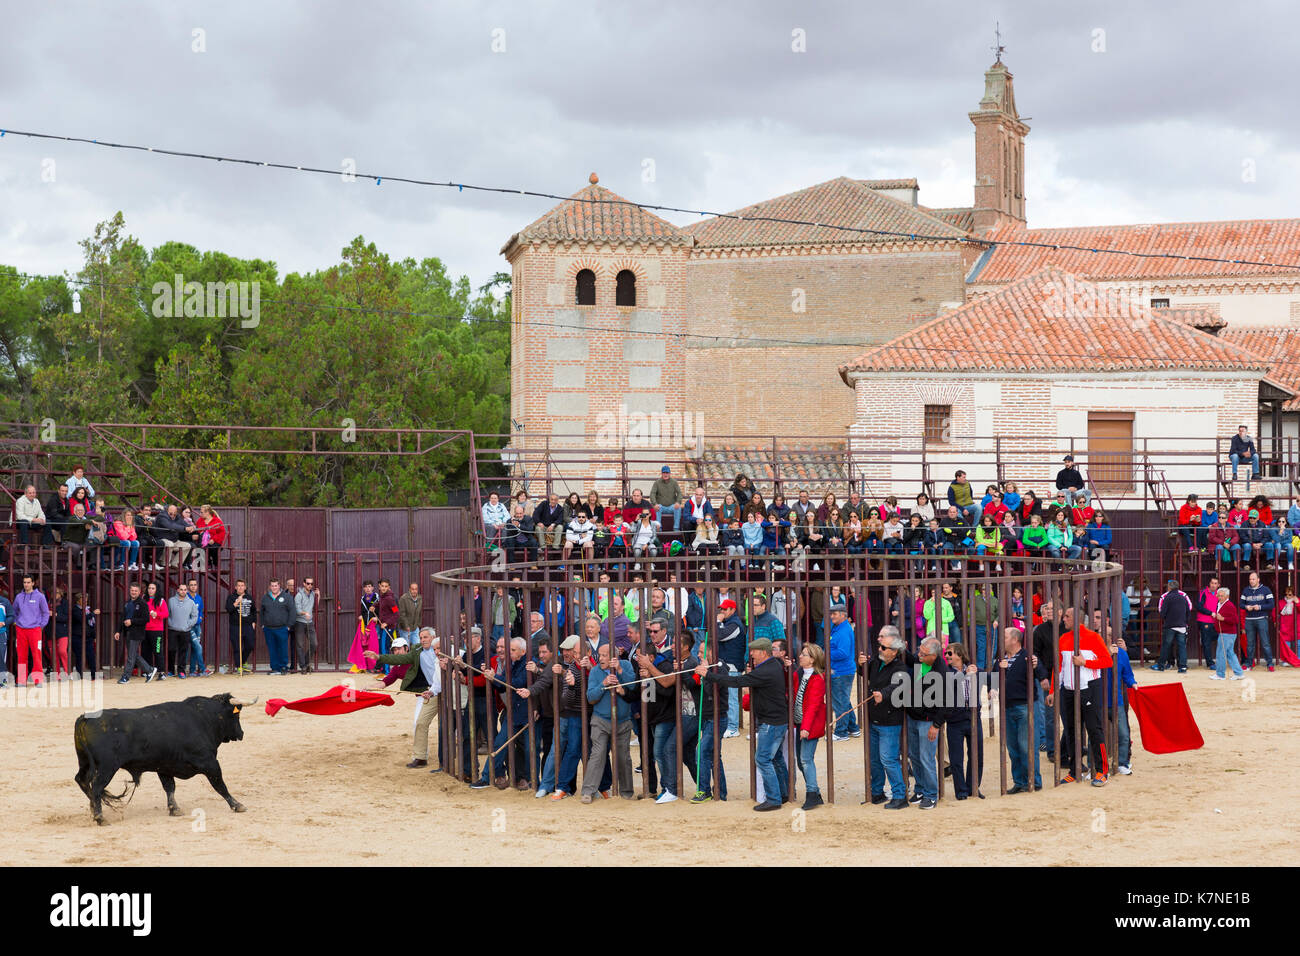 Local people challenging bull with red flag during traditional festival at Madrigal de los Altas Torres in province of Avila, Spain Stock Photo